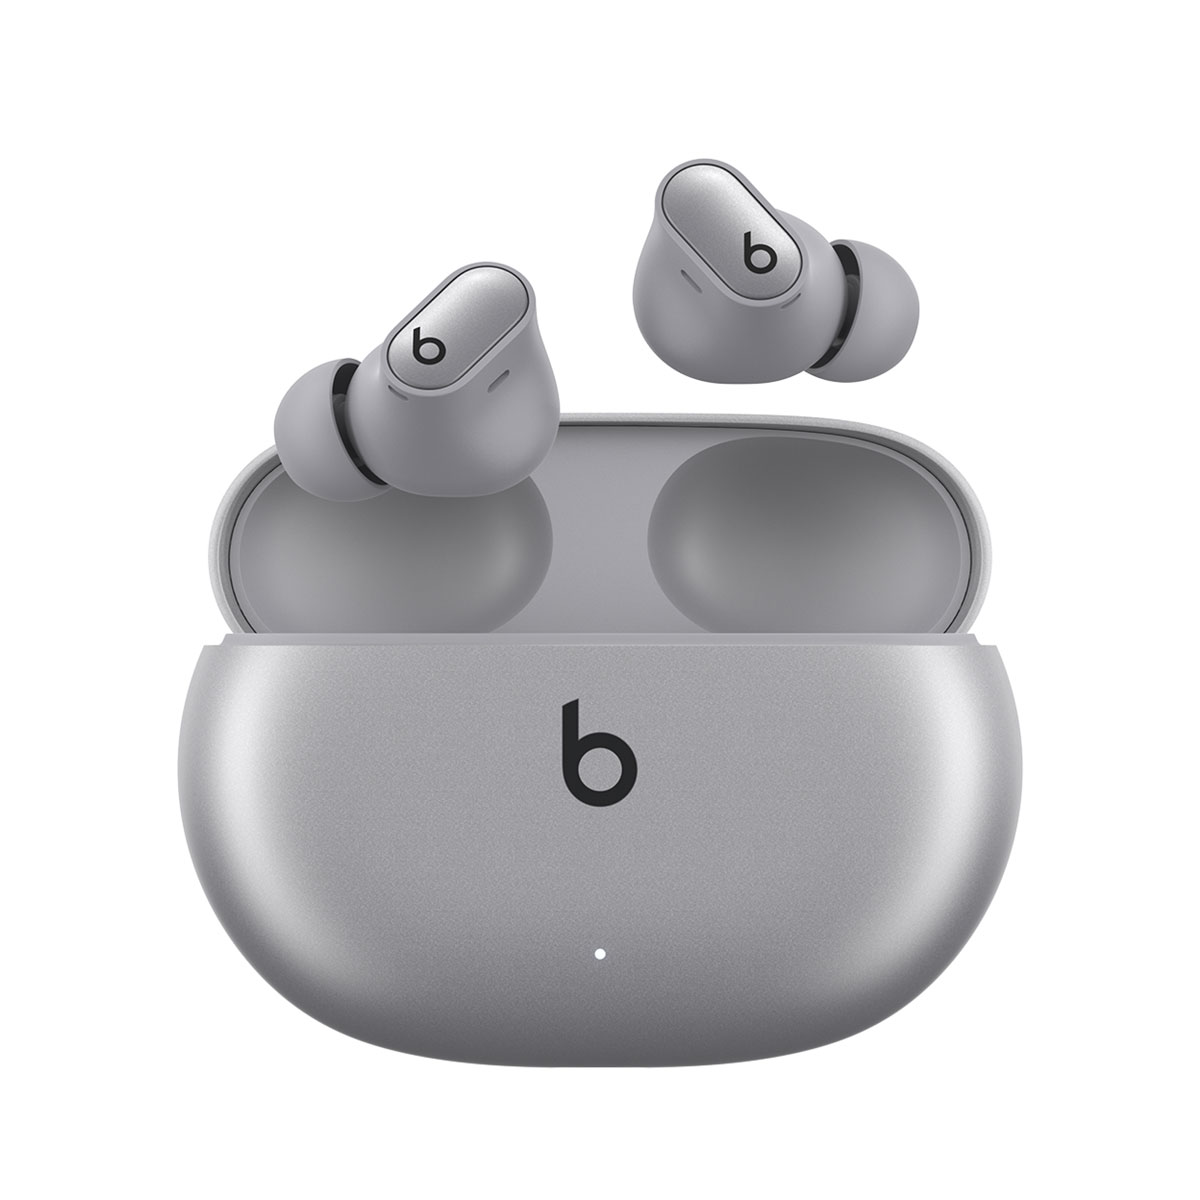 Beats Studio Buds Plus vs. AirPods Pro 2: which earbuds are best?